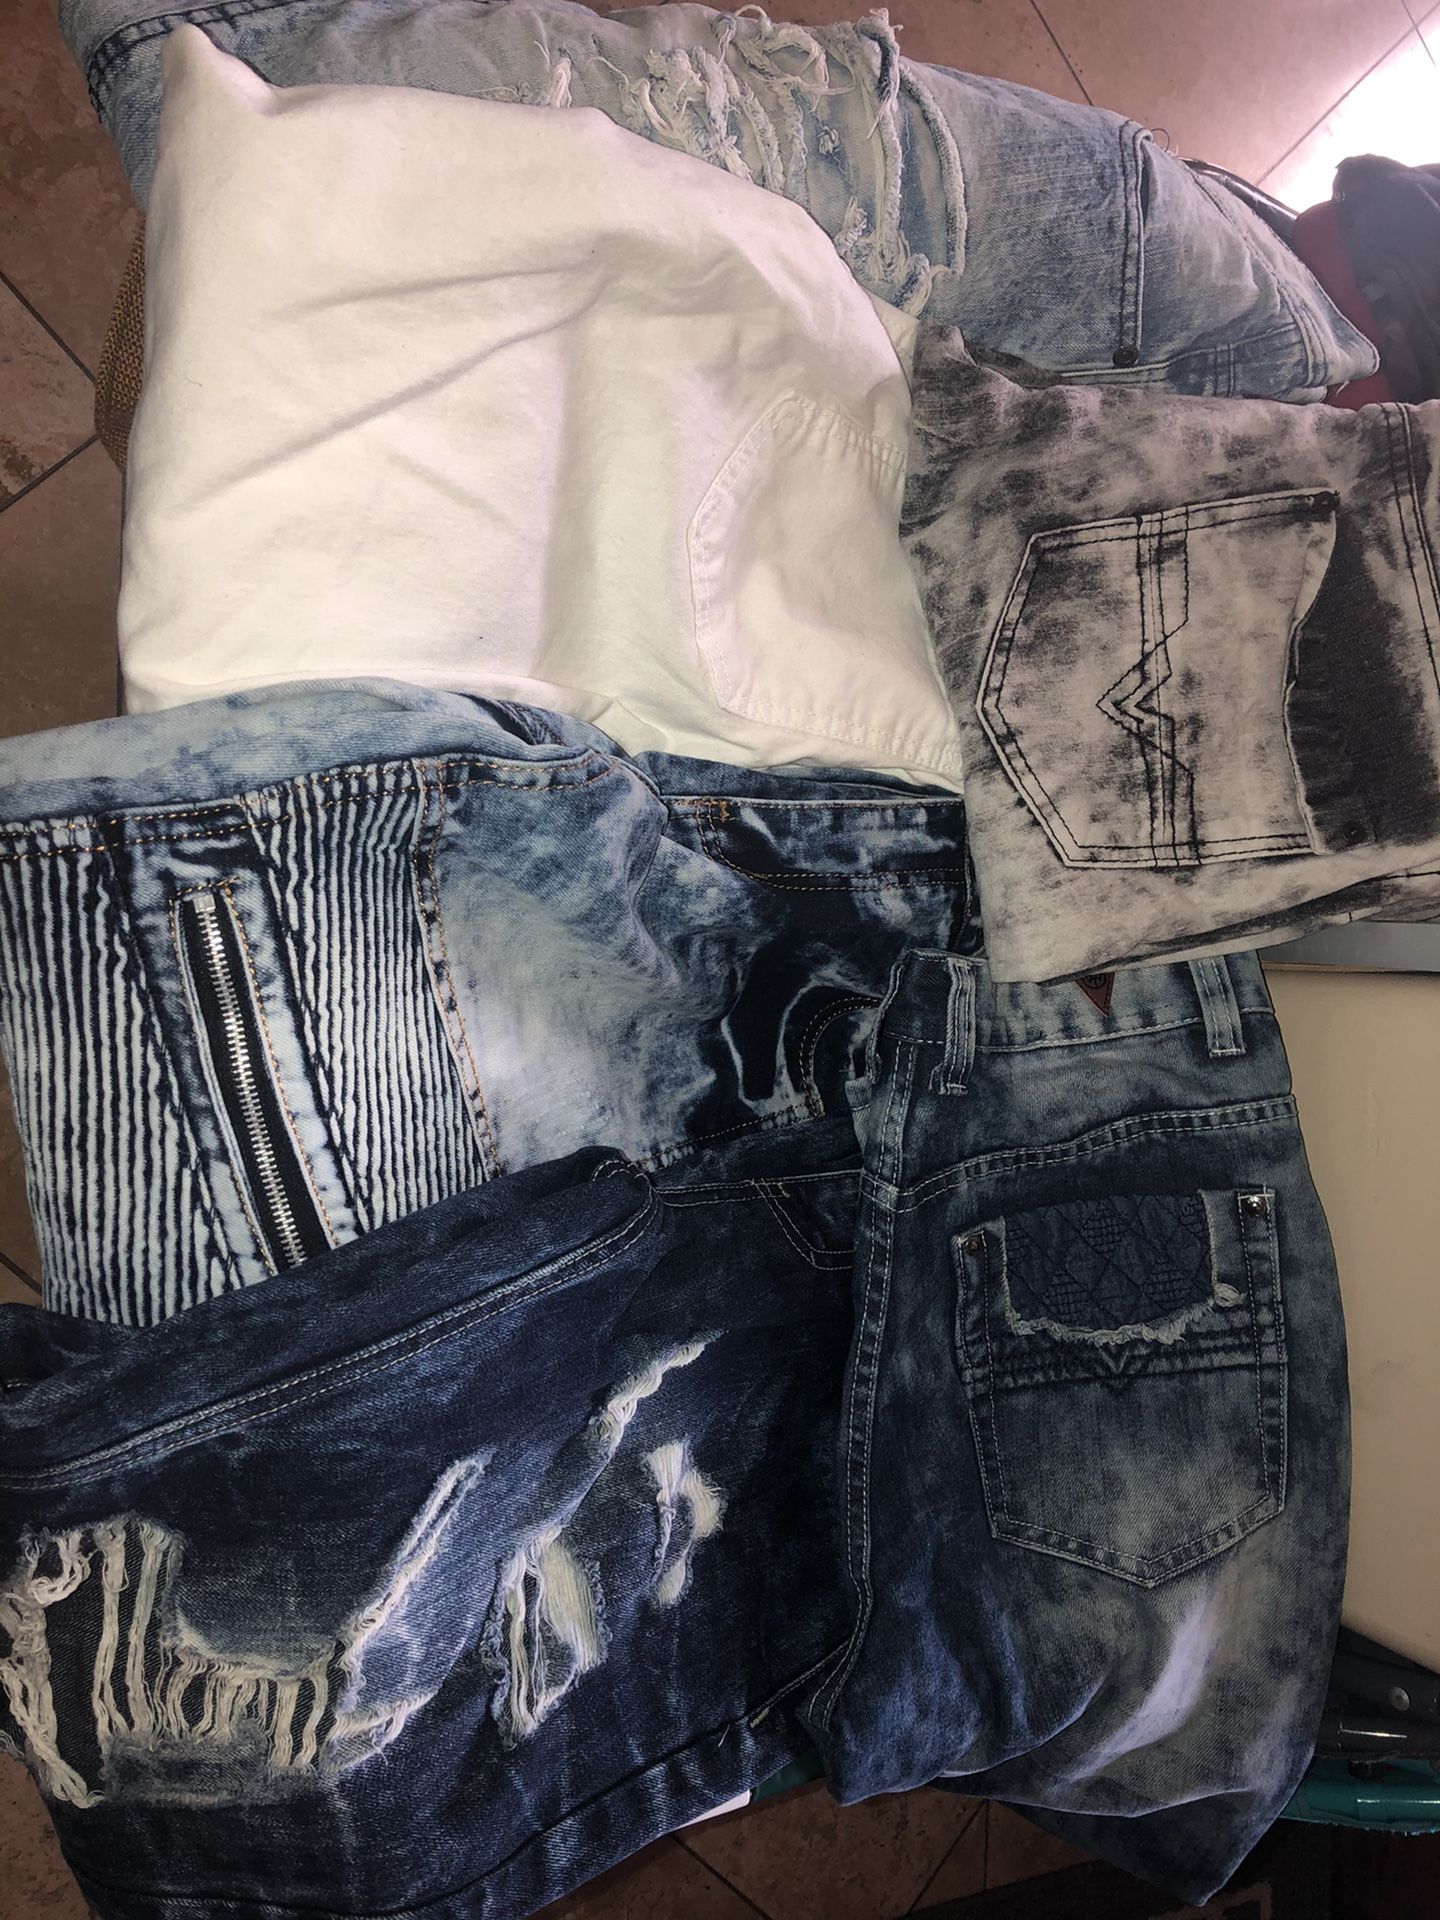 Jeans, jeans, jeans ($10 each)